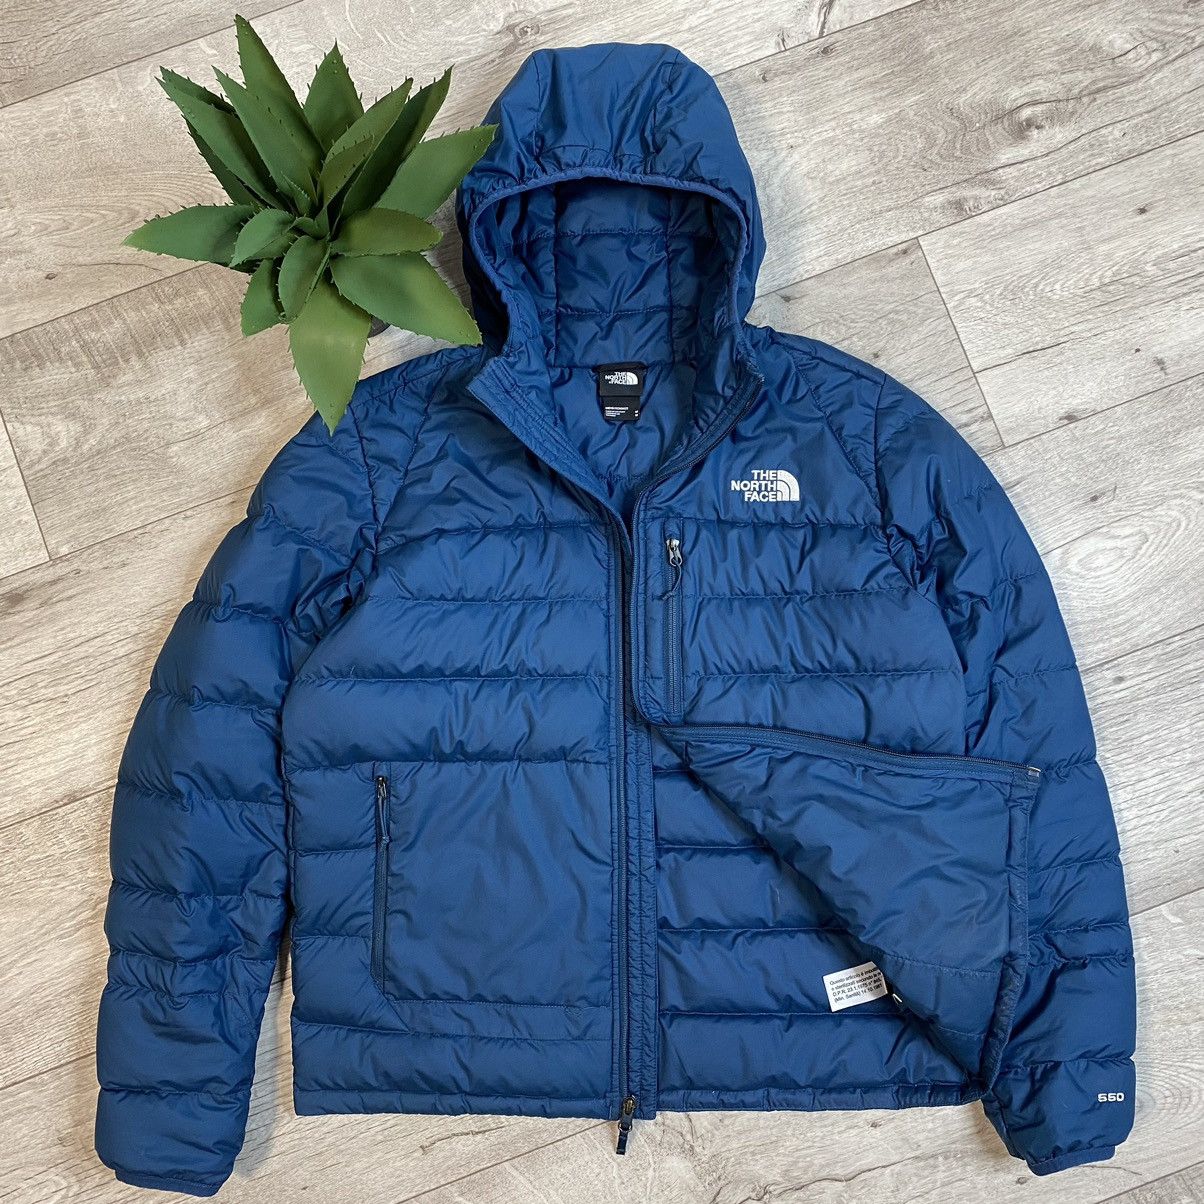 The North Face THE NORTH FACE s21 PUFFER DOWN JACKET 550 | Grailed